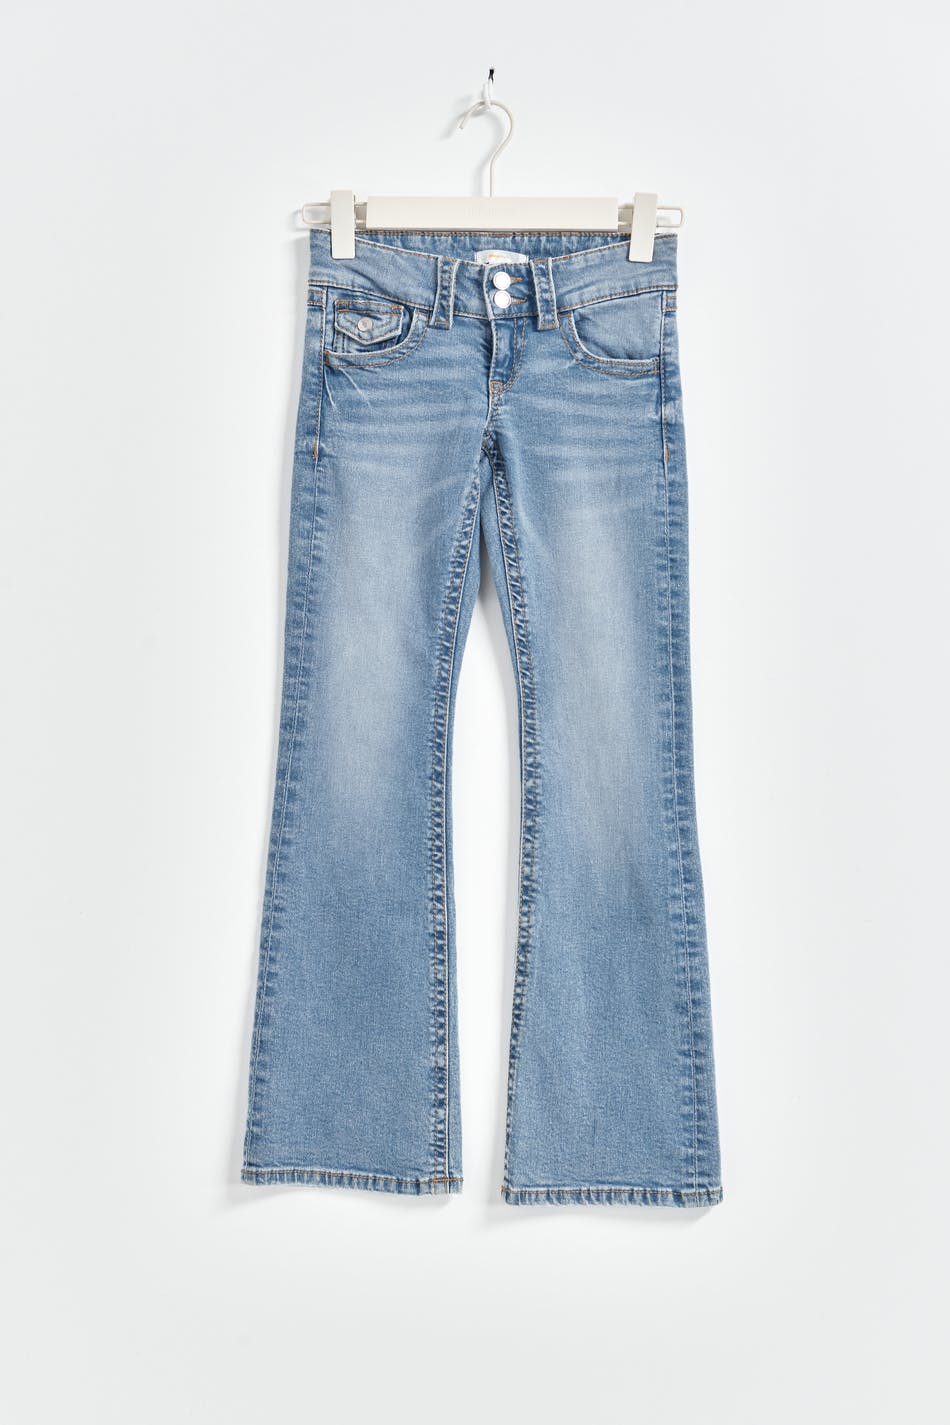 Gina Tricot - Chunky basic tall jeans - wide jeans - Blue - 152 - Female